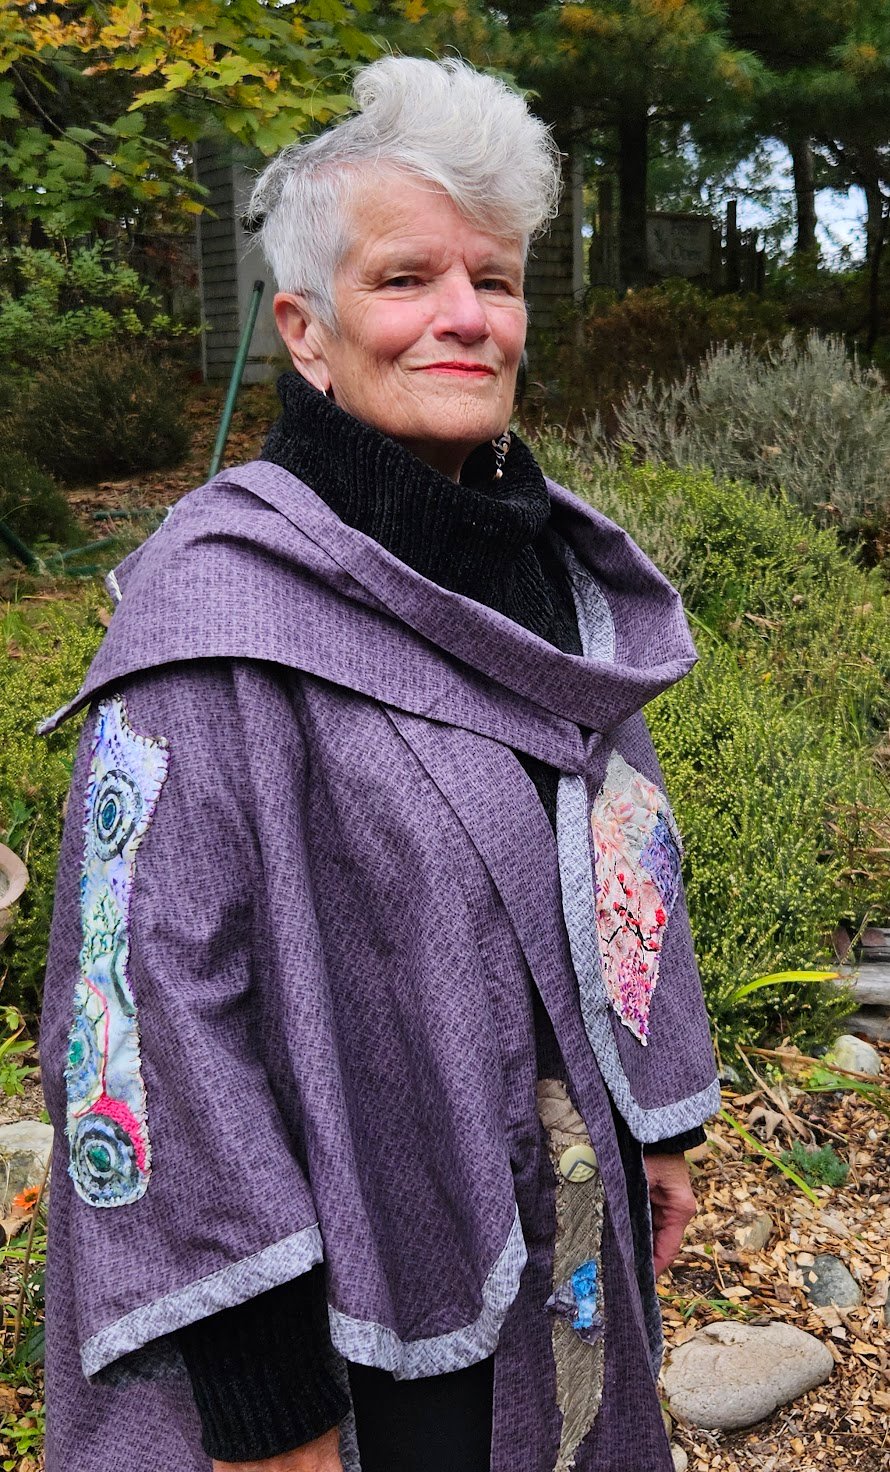 Purple Kimono embellished with altered textiles